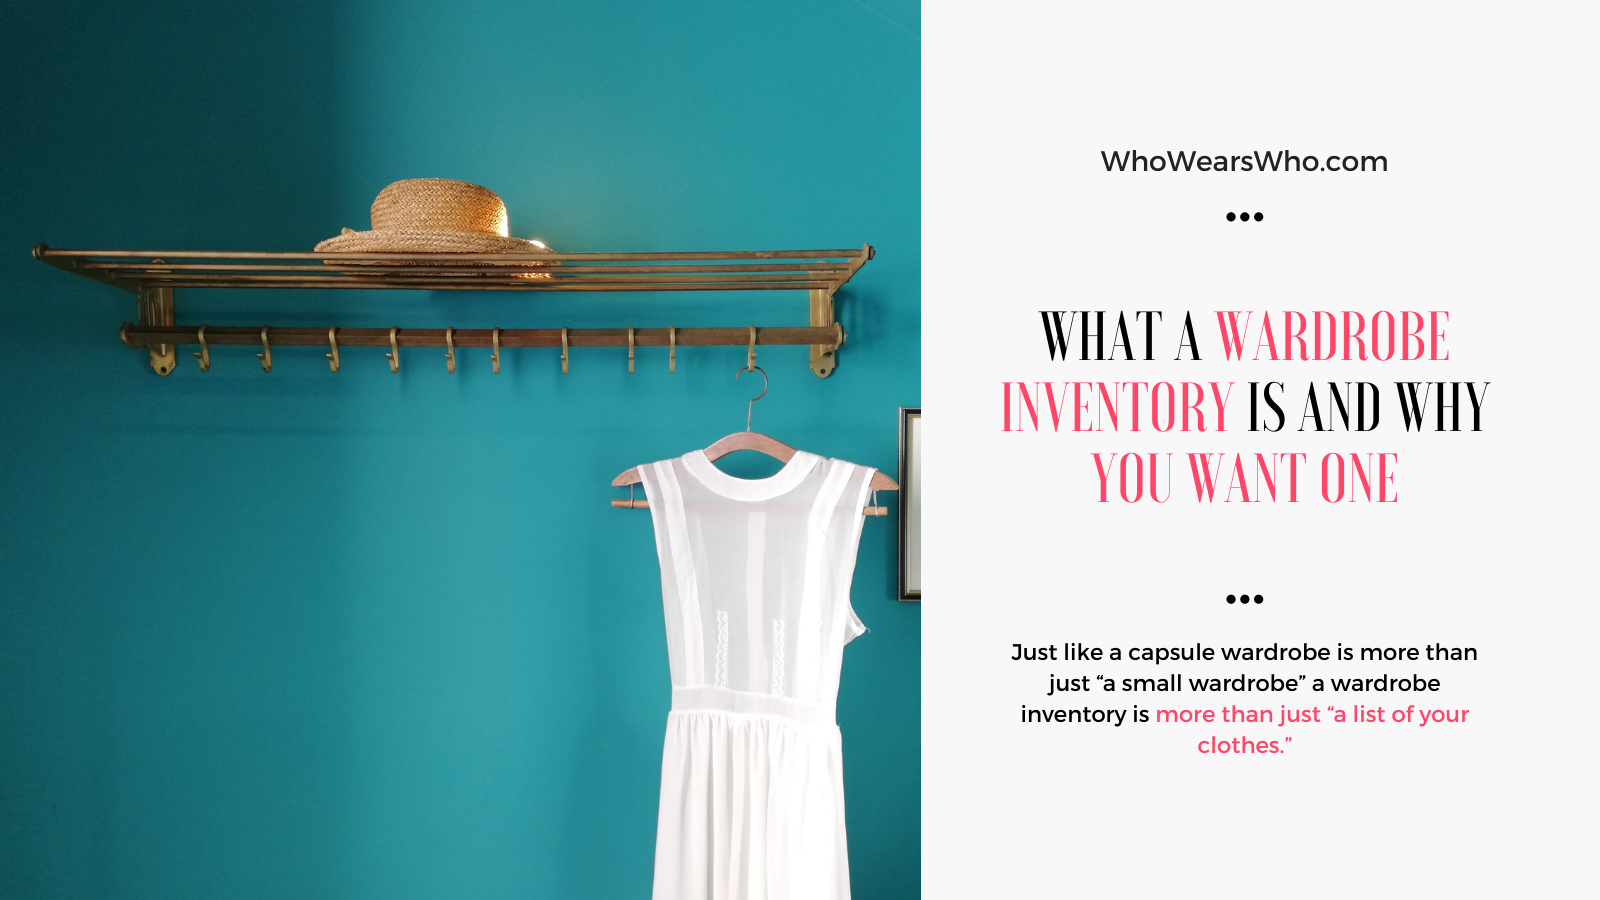 What a wardrobe inventory is and why you want one Twitter